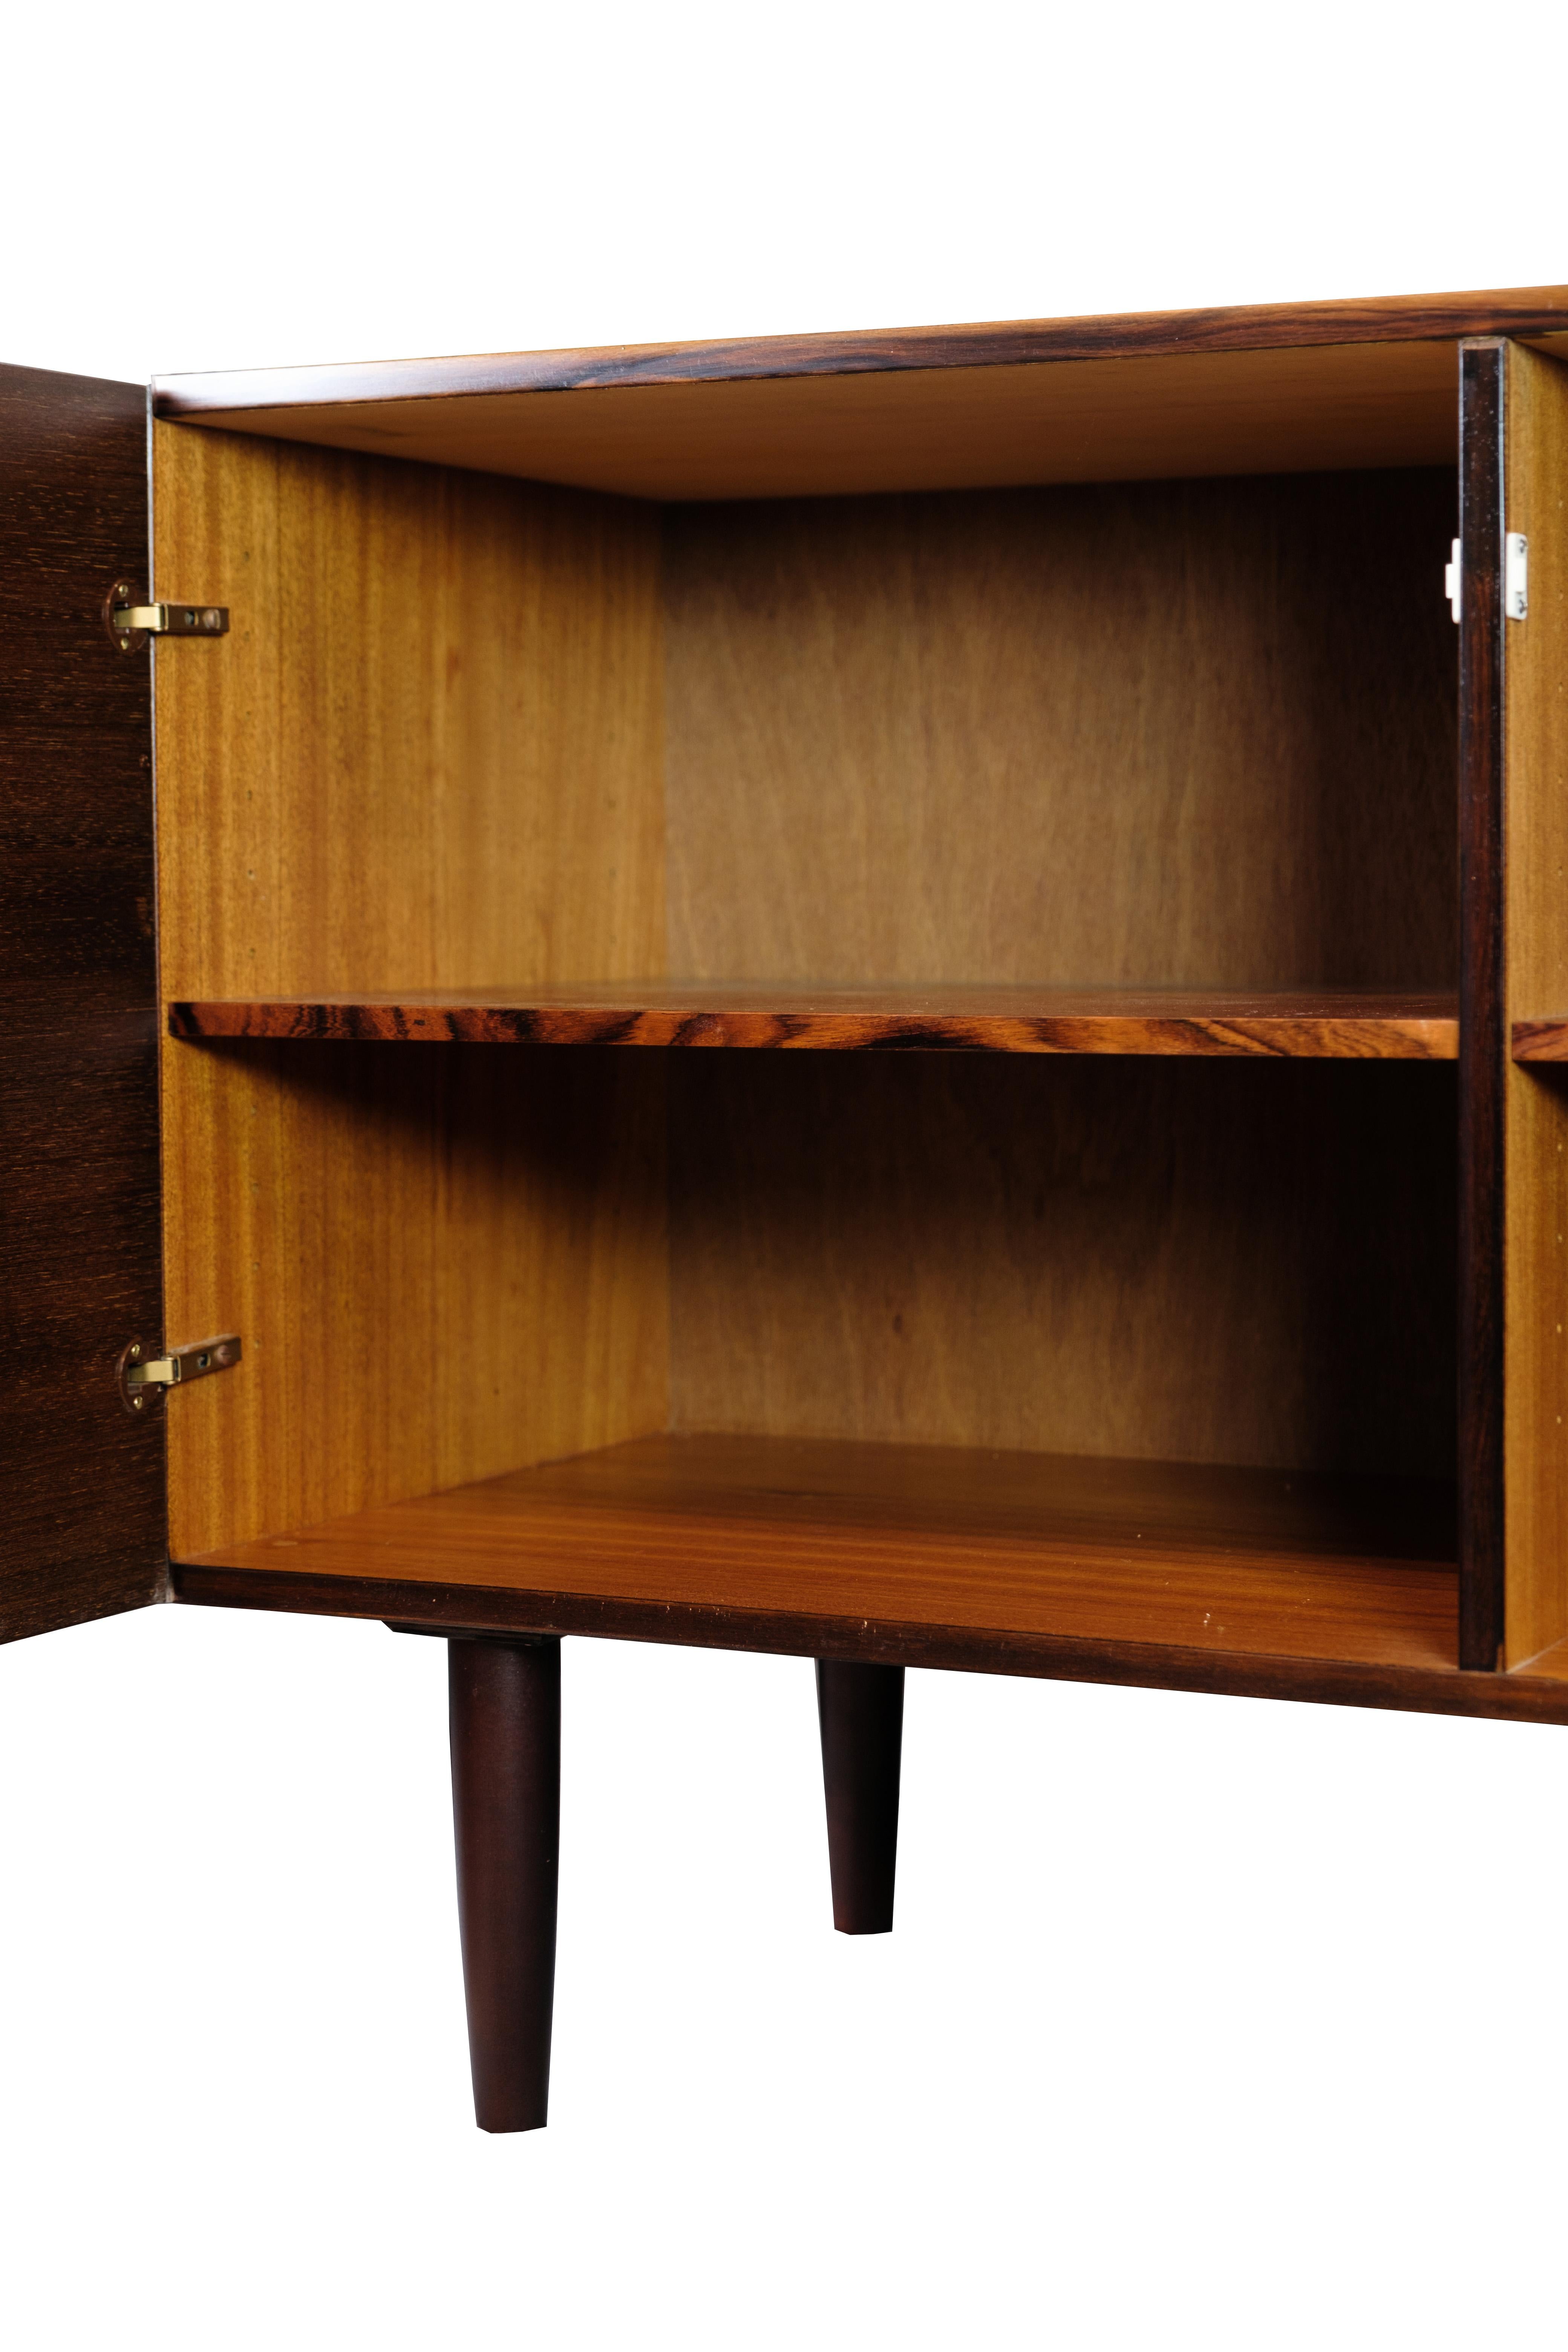 Mid-20th Century Sideboard Made In Rosewood Danish Design From 1960s For Sale